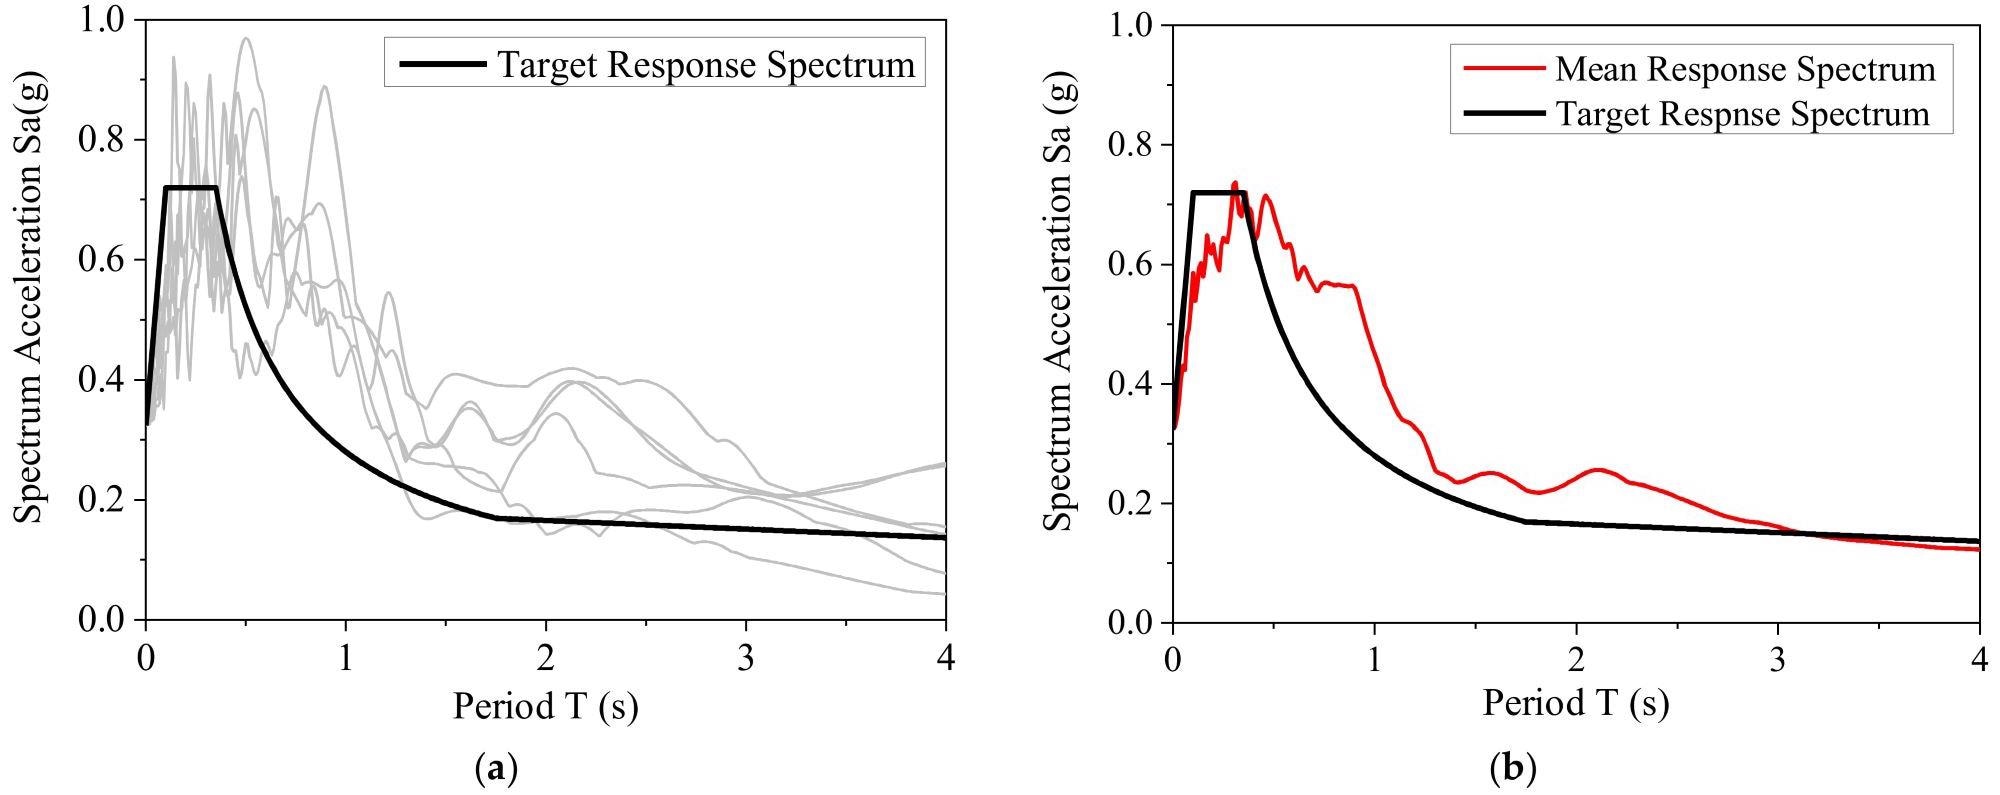 Spectral characteristics of the selected ground motions: (a) each response spectrum and target response spectrum; (b) mean response spectrum and target response spectrum.